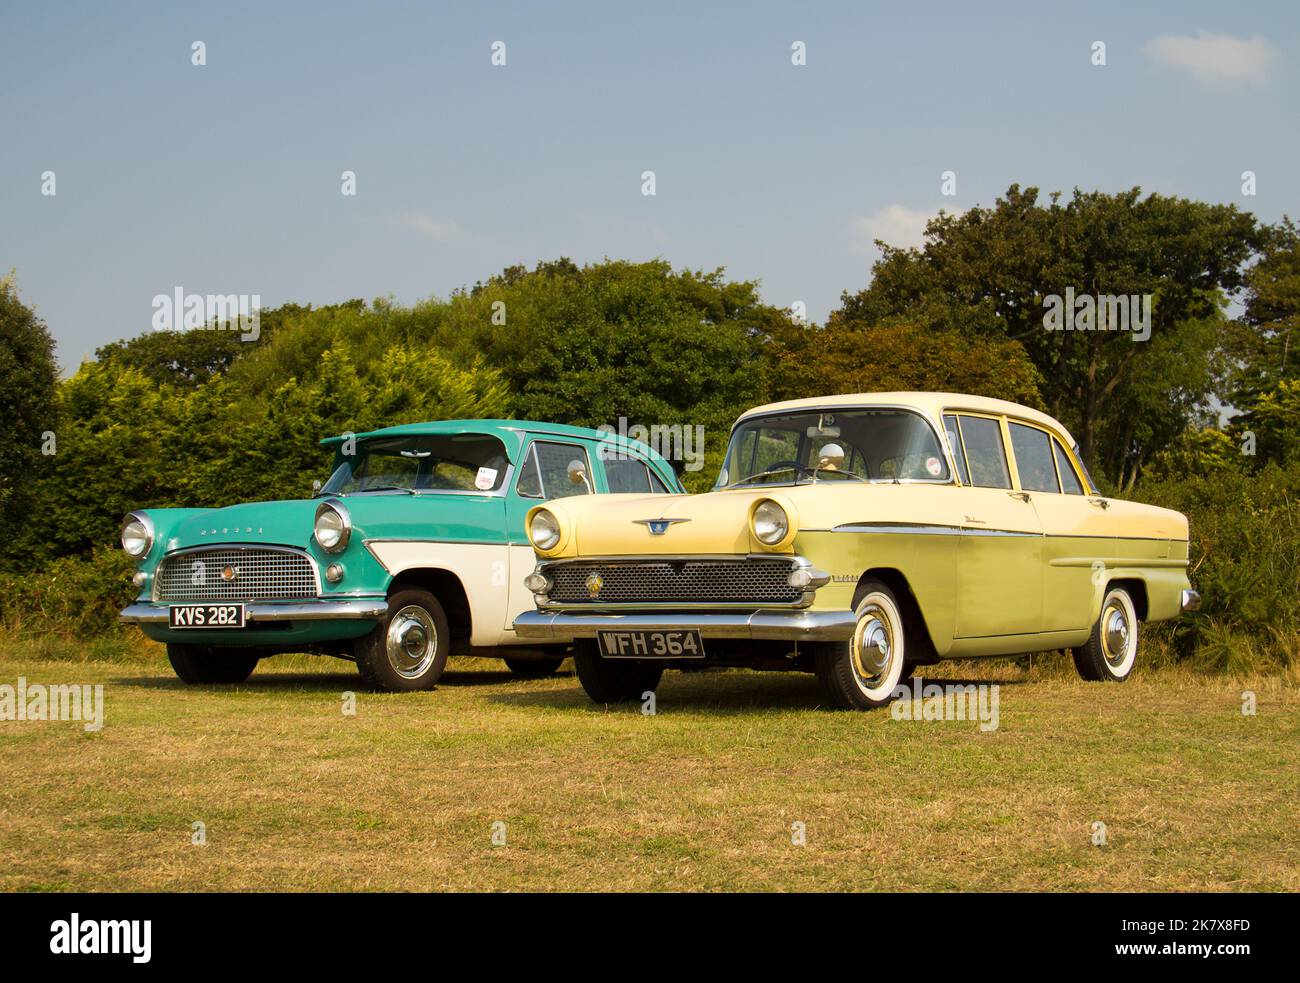 Two 1950s british classic cars at a car show. Stock Photo